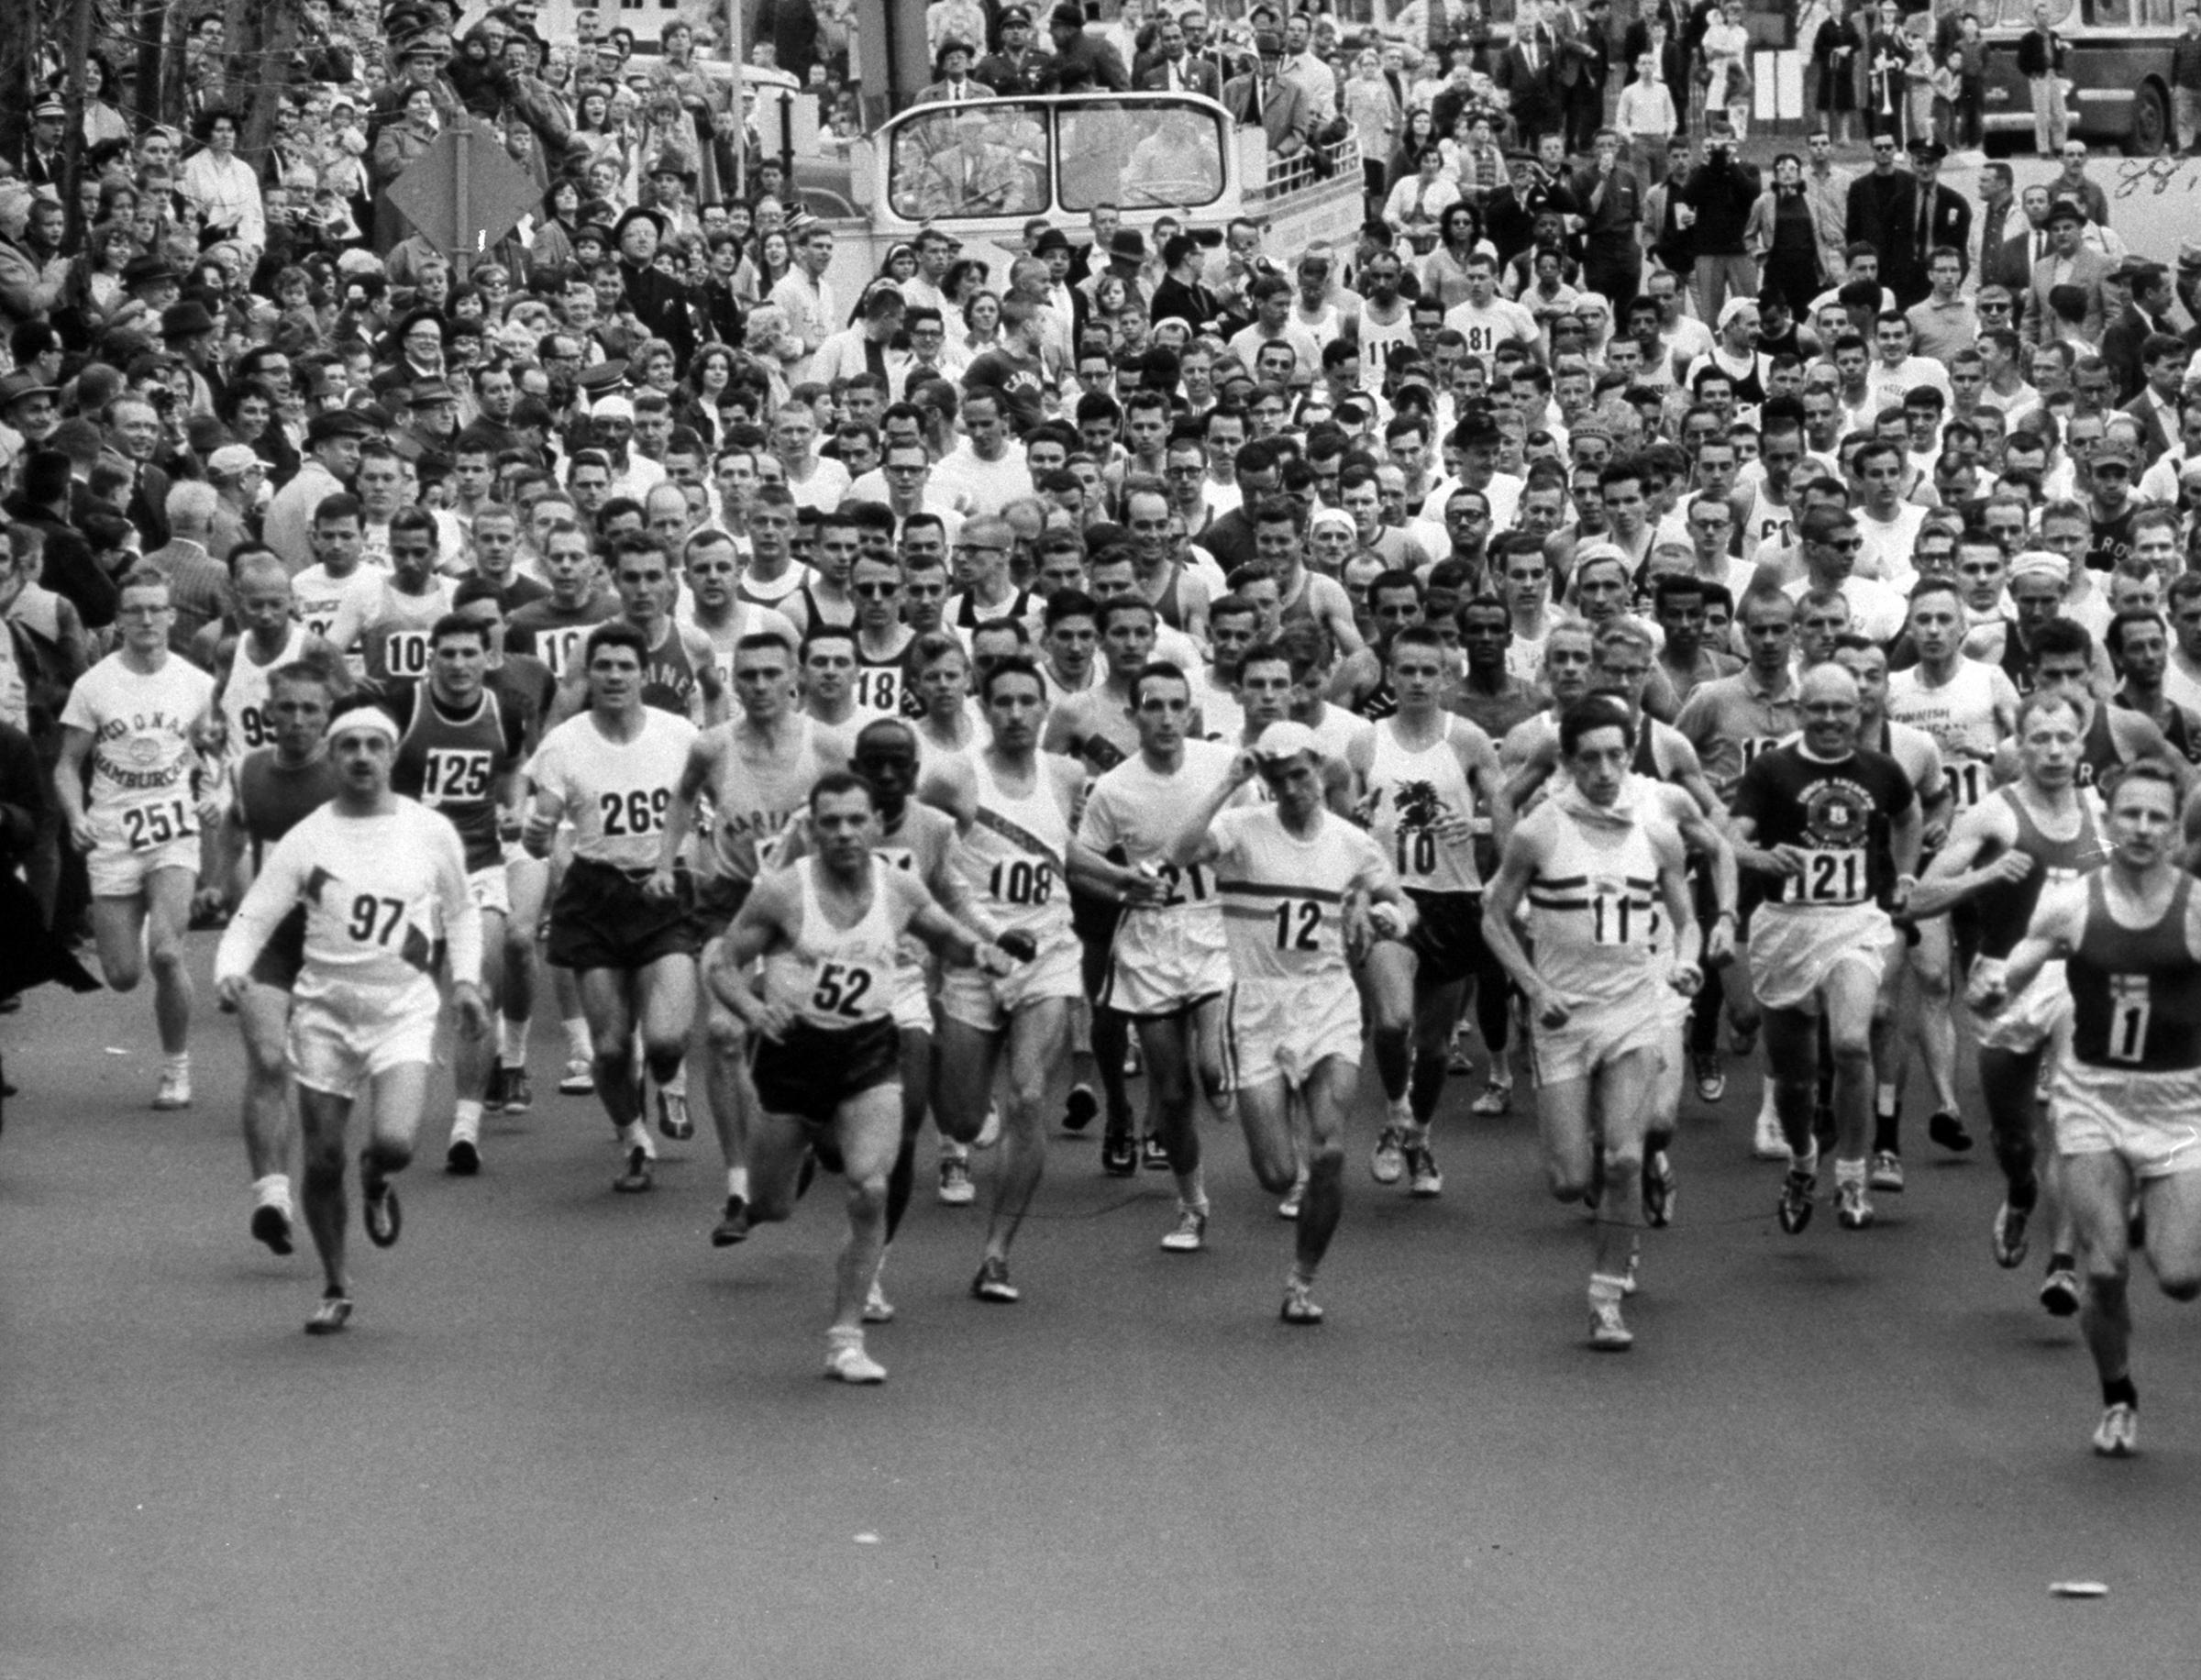 237 runners competing in annual Boston Marathon crossing the starting line, 1963.